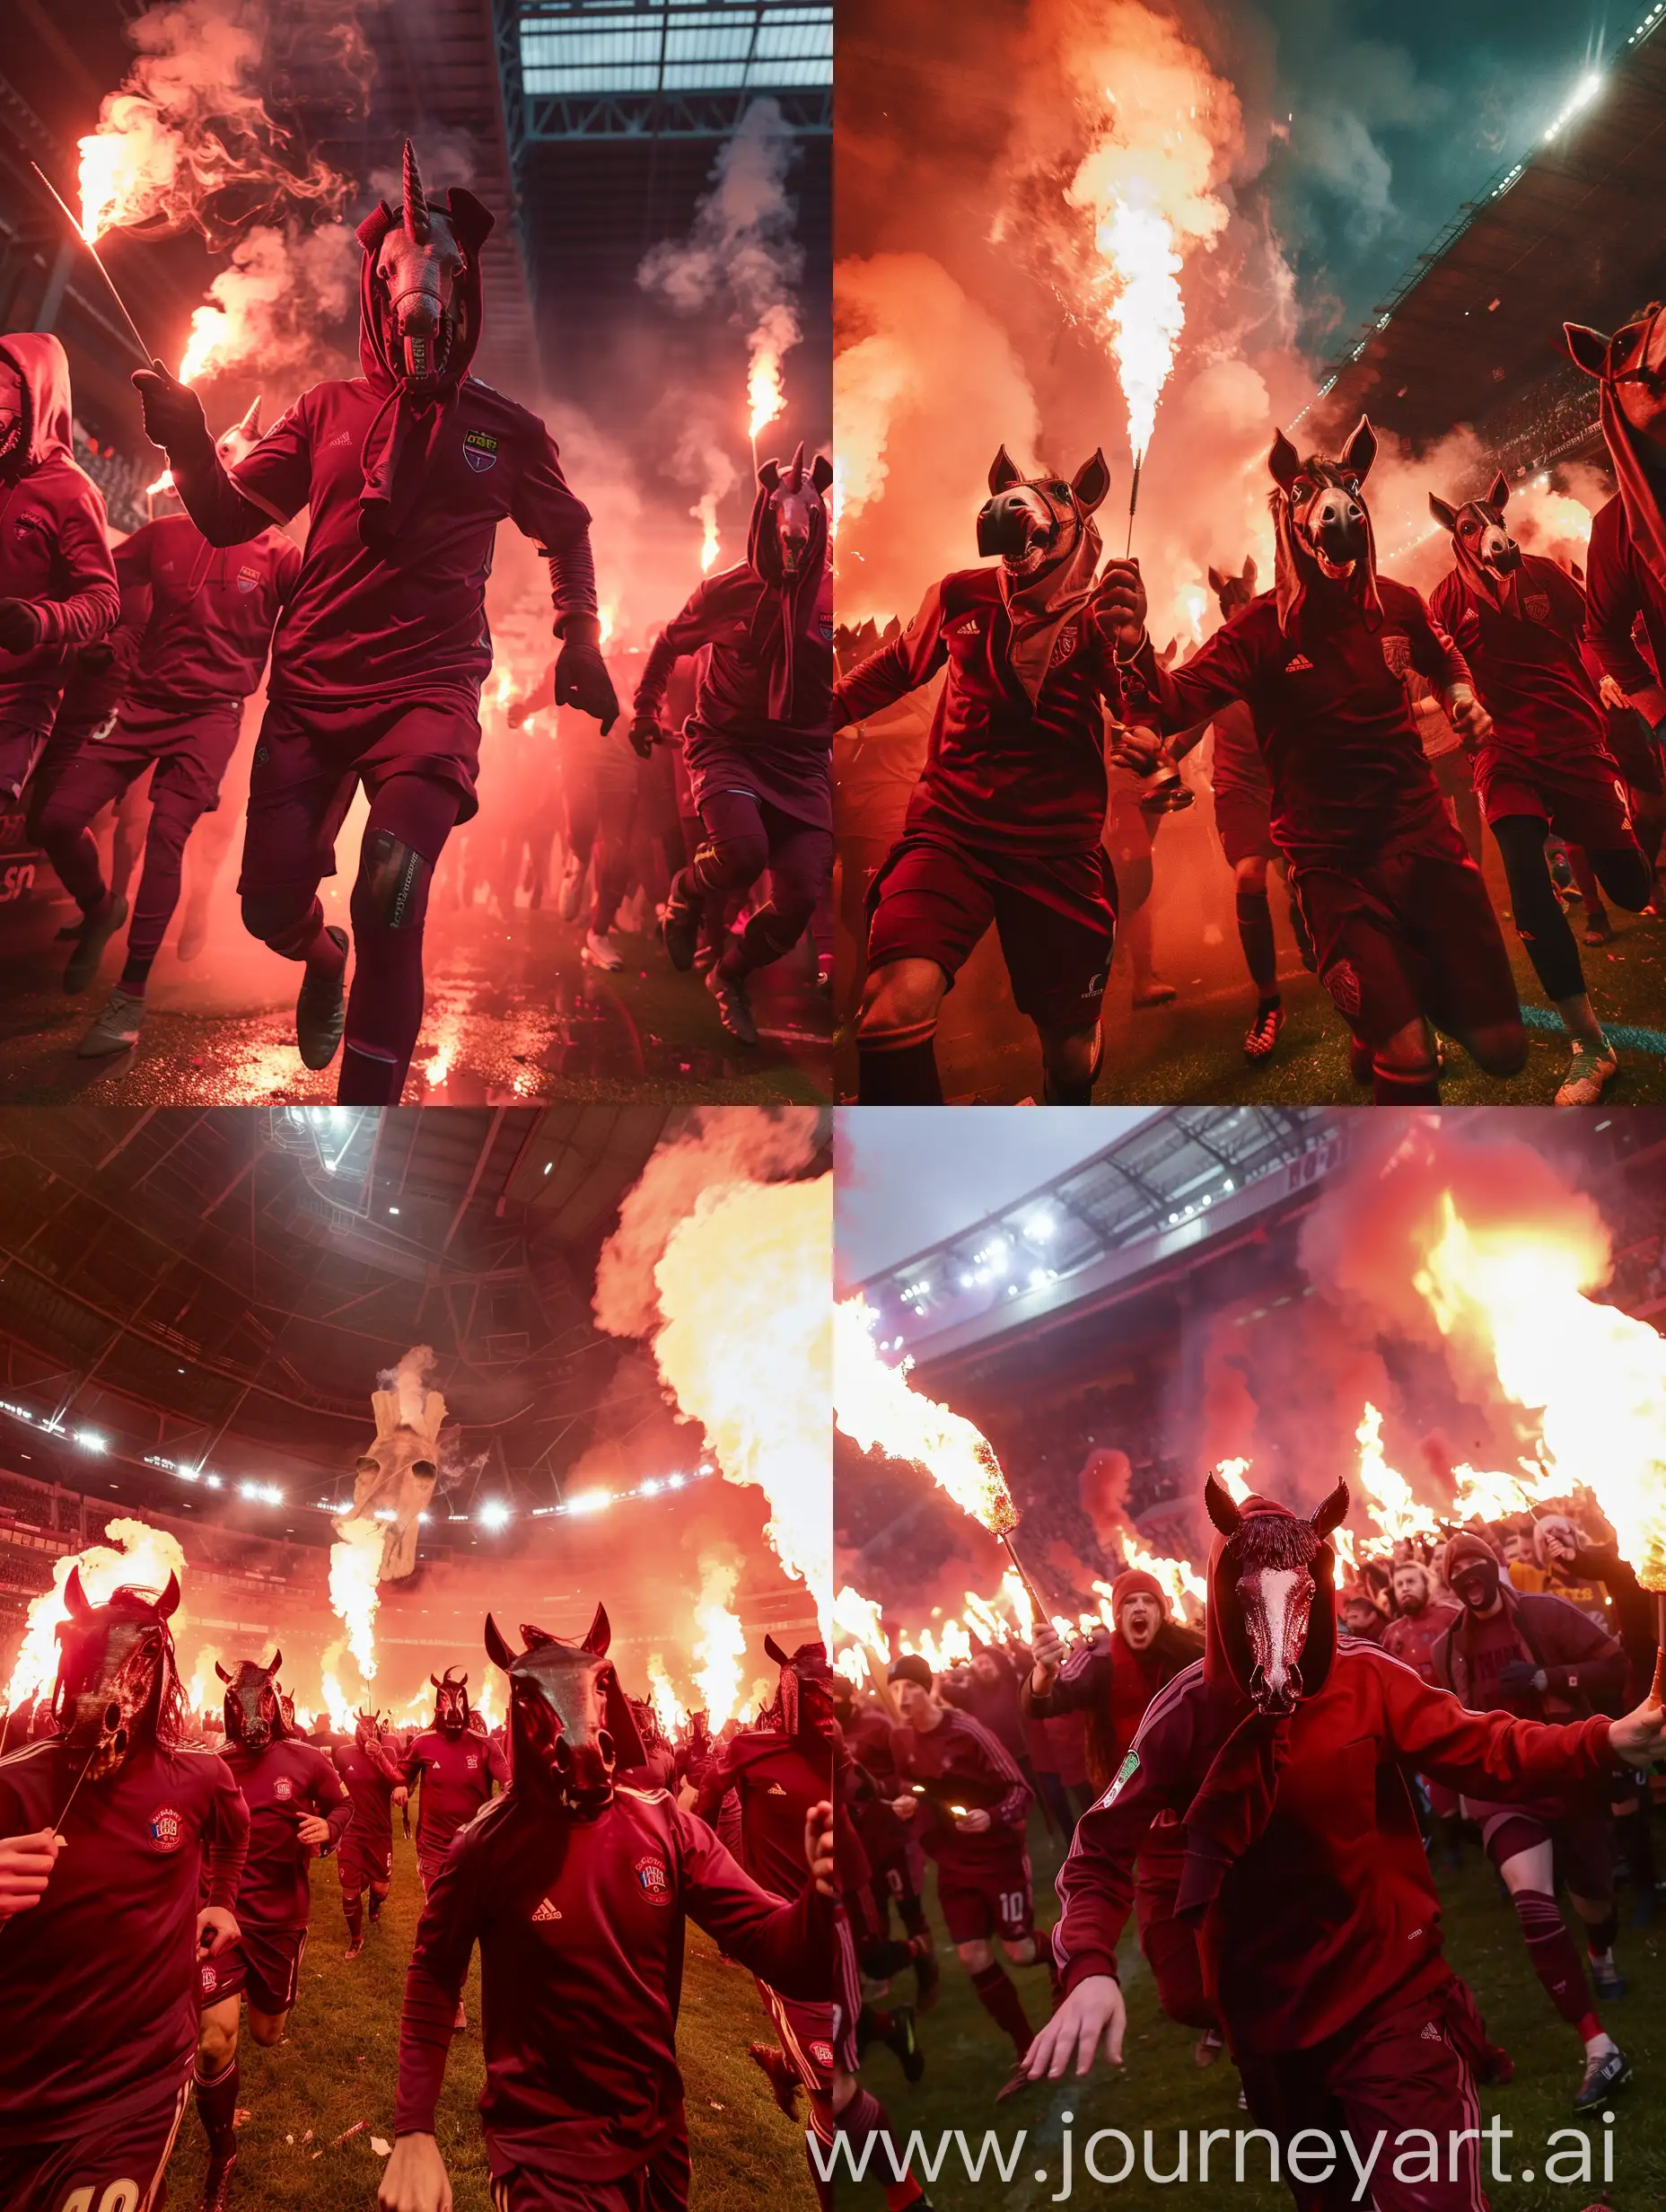 hooligans with maroon clothes and horse heads, holding flares and run to thes camera inside of a soccer stadium